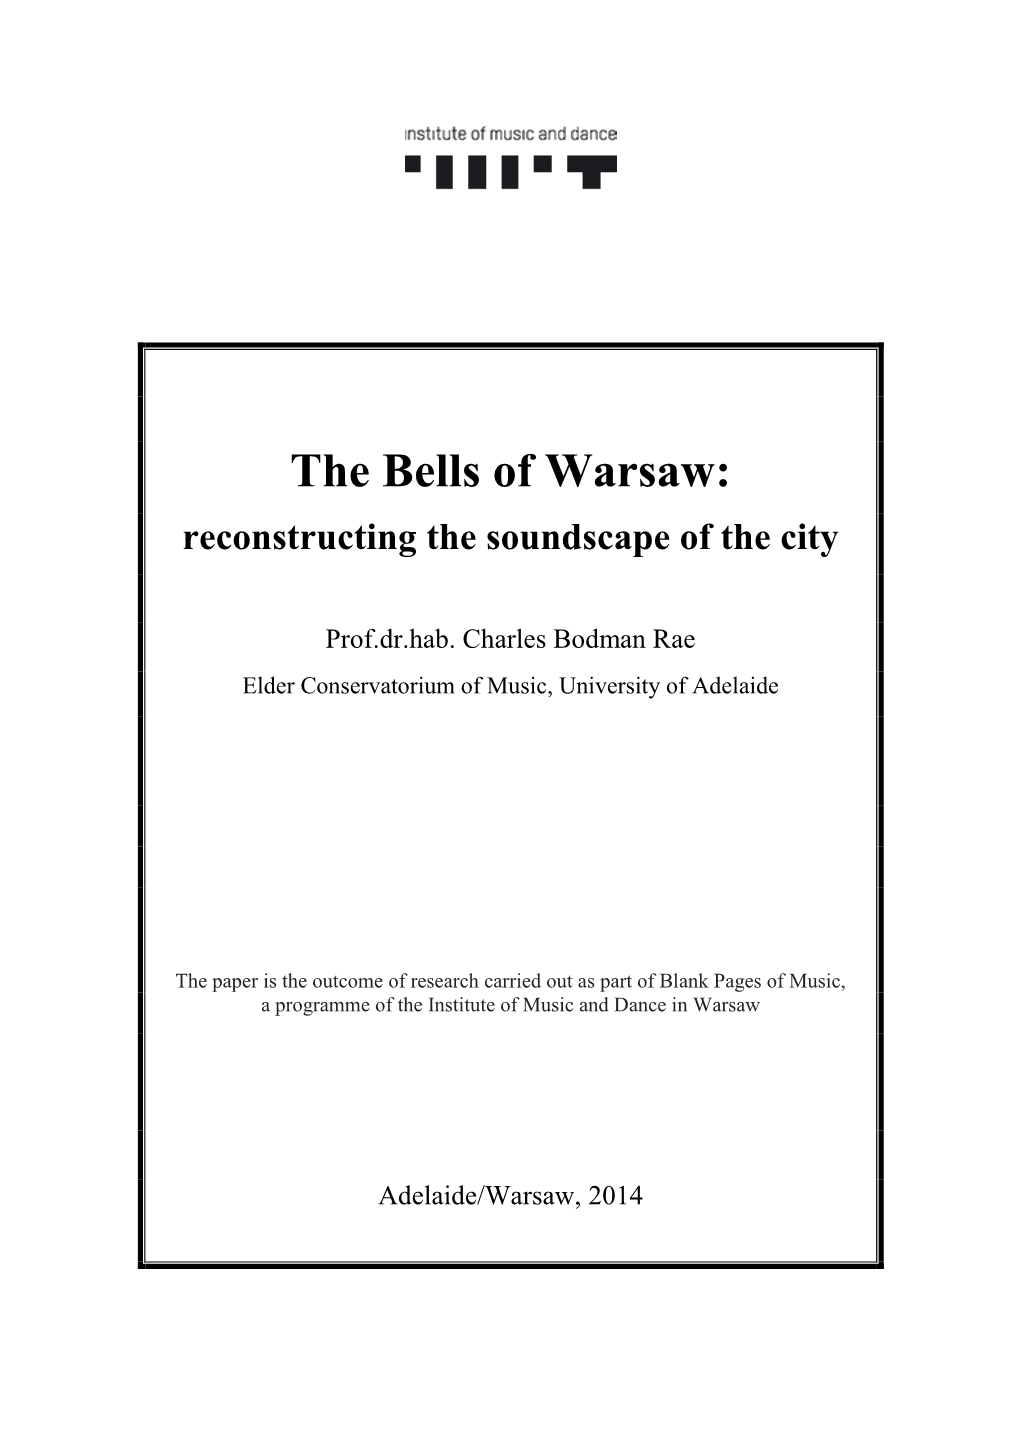 The Bells of Warsaw: Reconstructing the Soundscape of the City